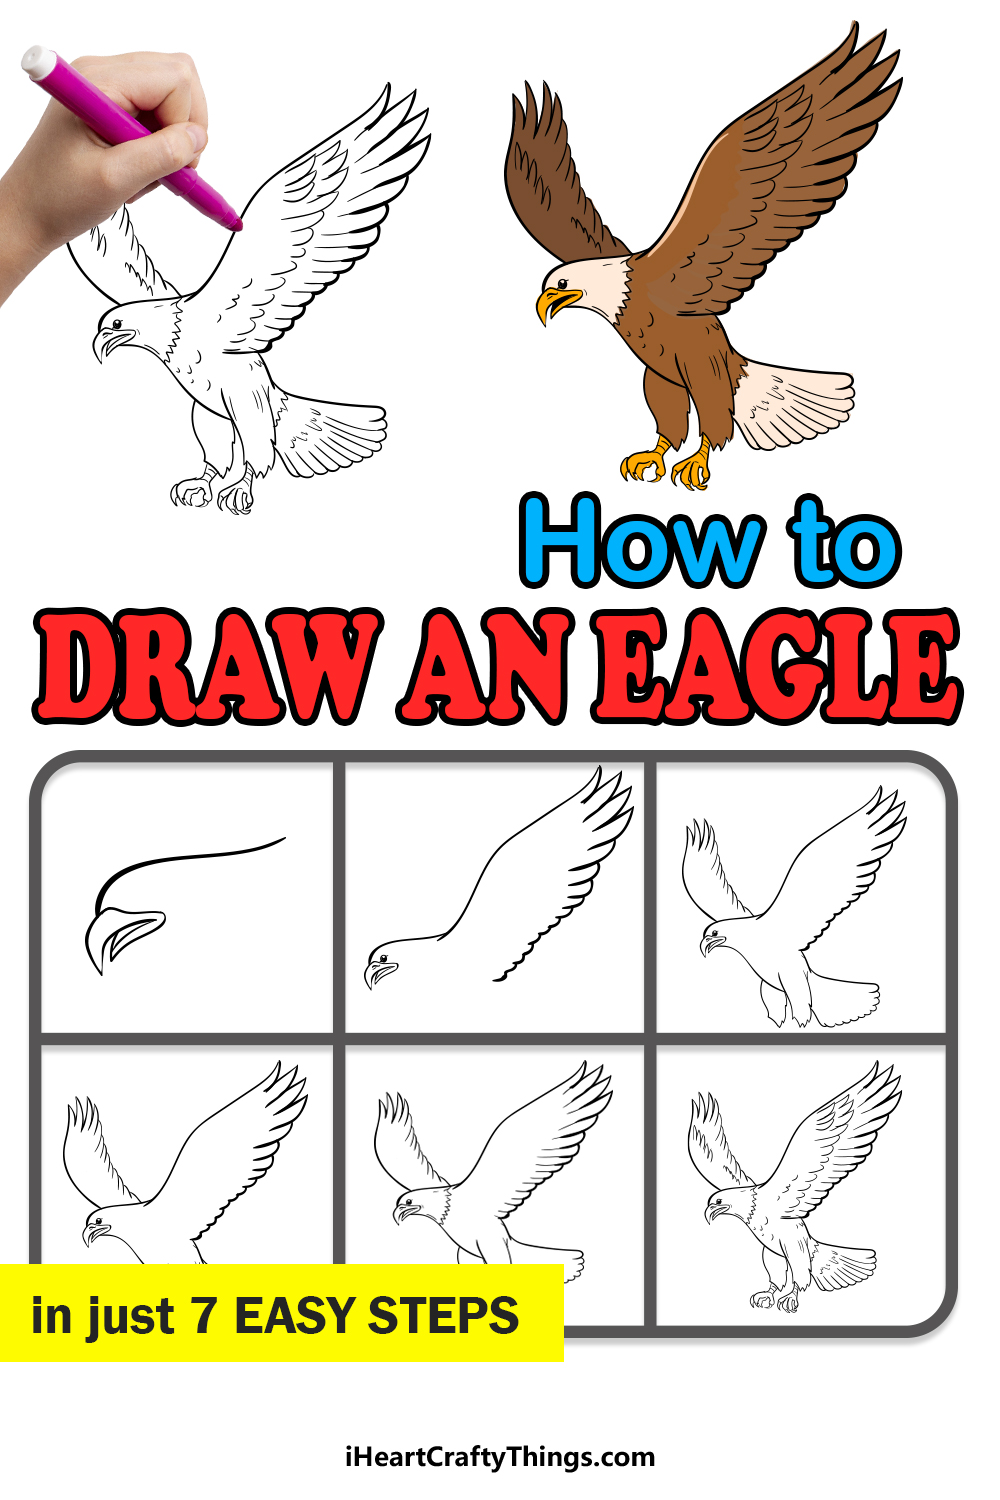 how to draw an eagle in 7 easy steps